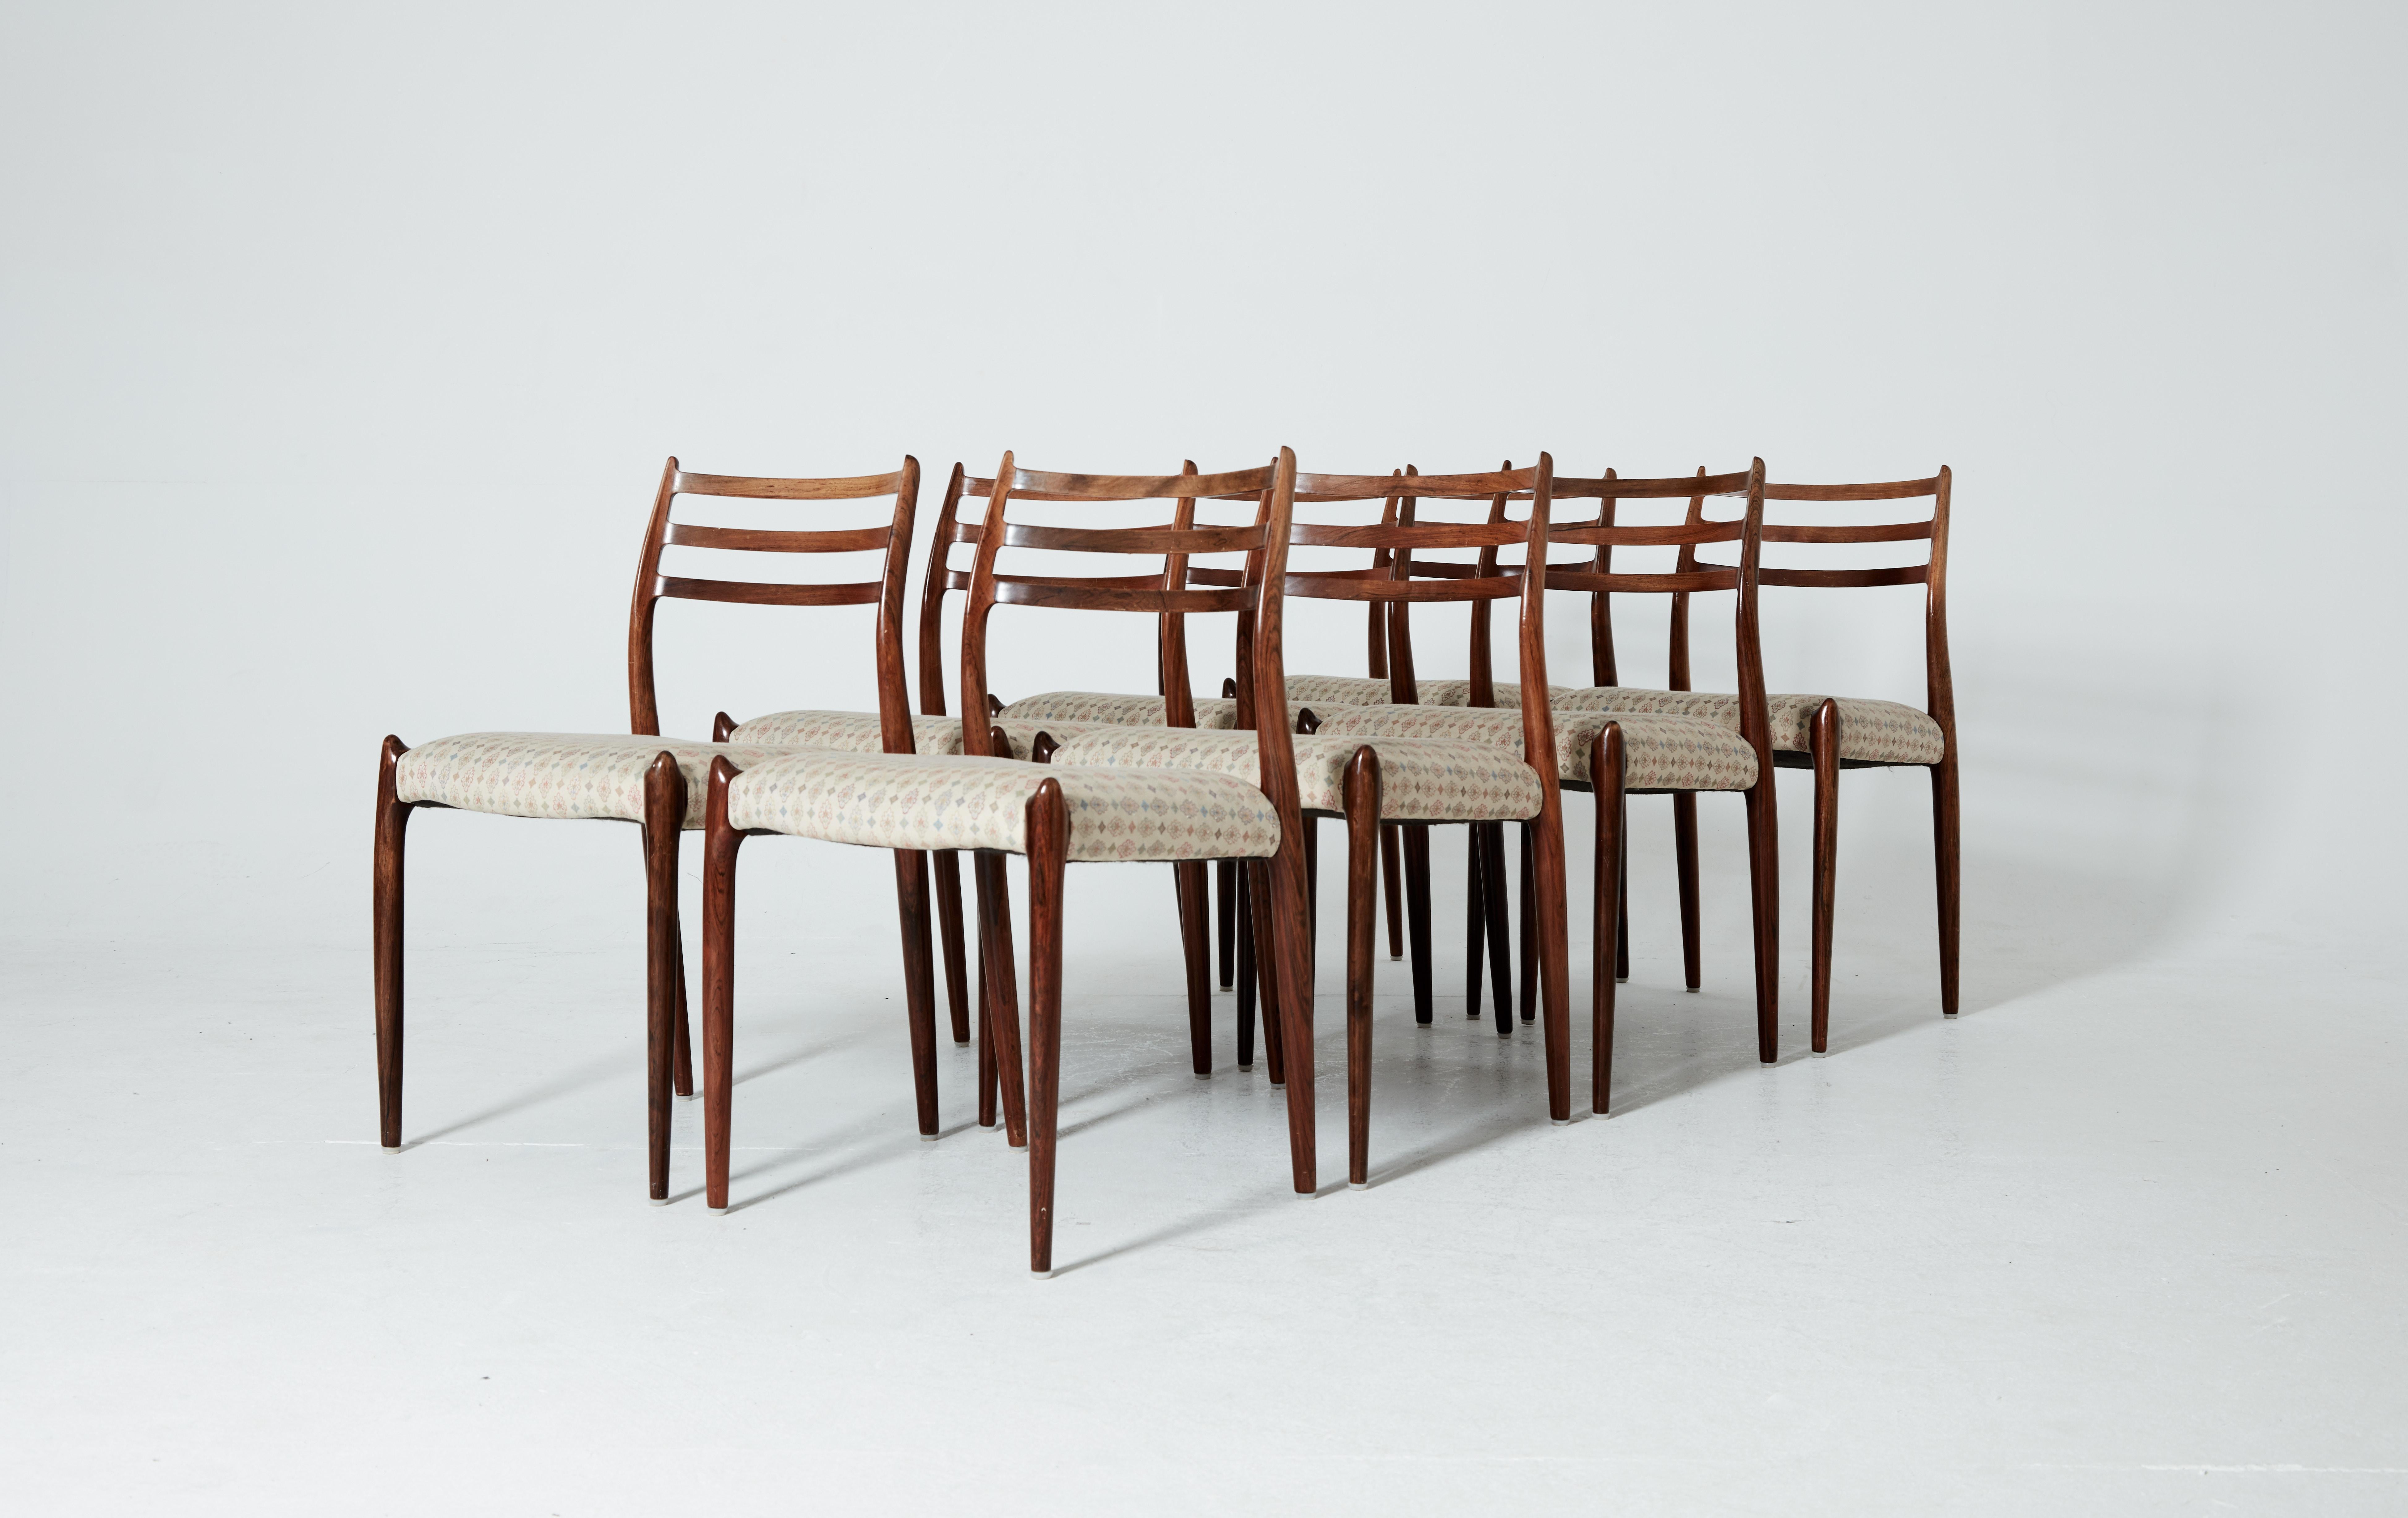 A set of eight rosewood N.O. Møller 78 side chairs. 1962 for J.L. Møllers Møbelfabrik, Denmark. Rosewood frames and fabric seat covers. We can change the seat covers to leather, vinyl or cord if you wish.